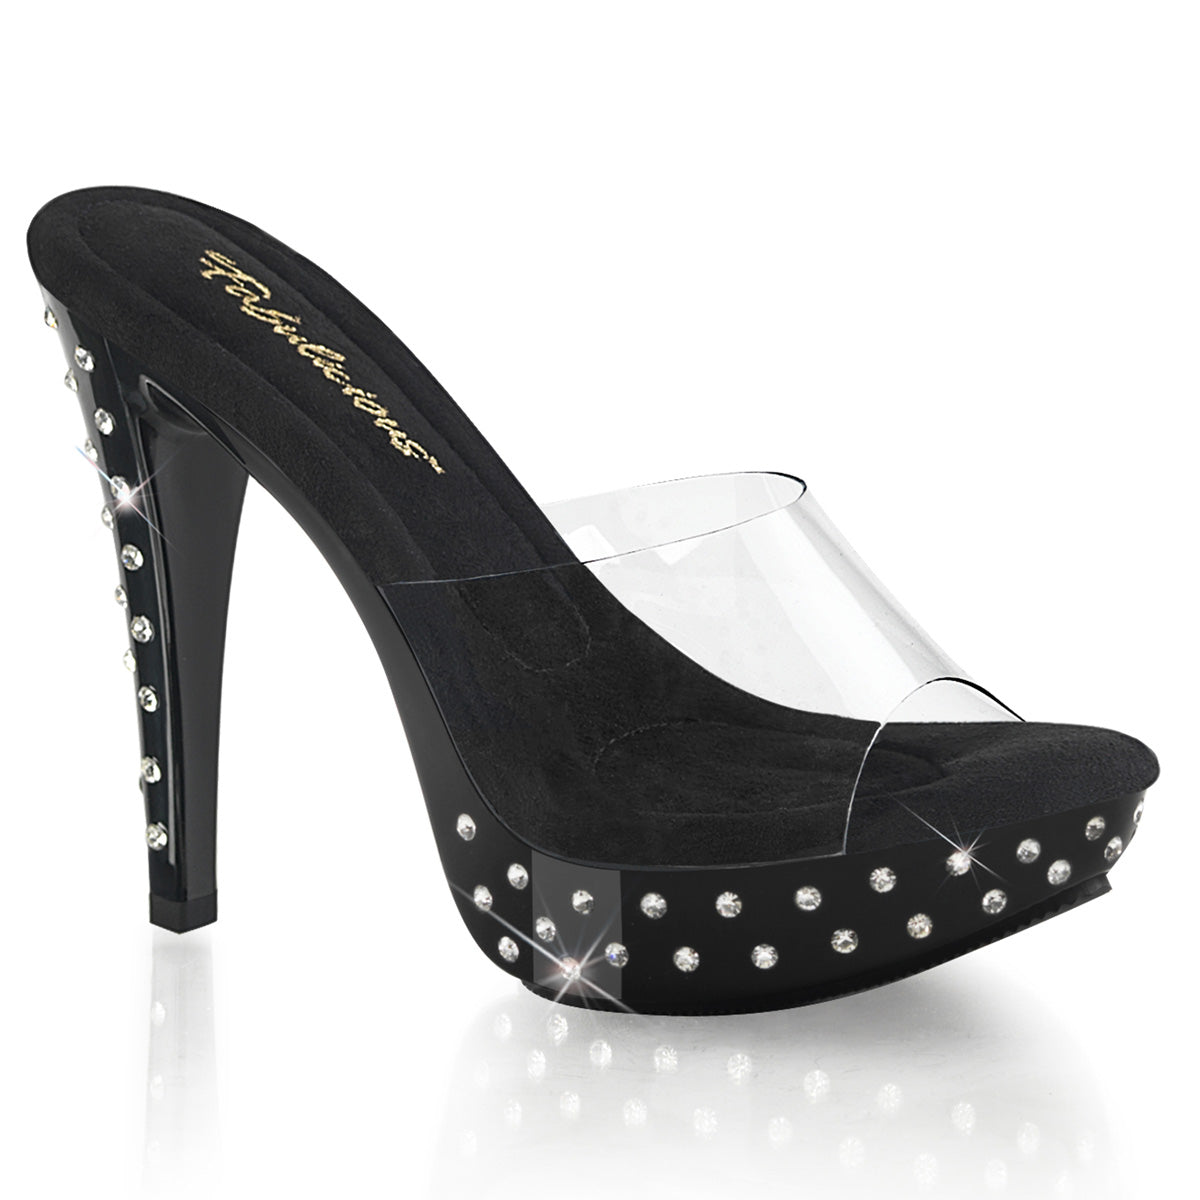 COCKTAIL-501SDT Fabulicious 5" Heel Clear Black Sexy Shoes